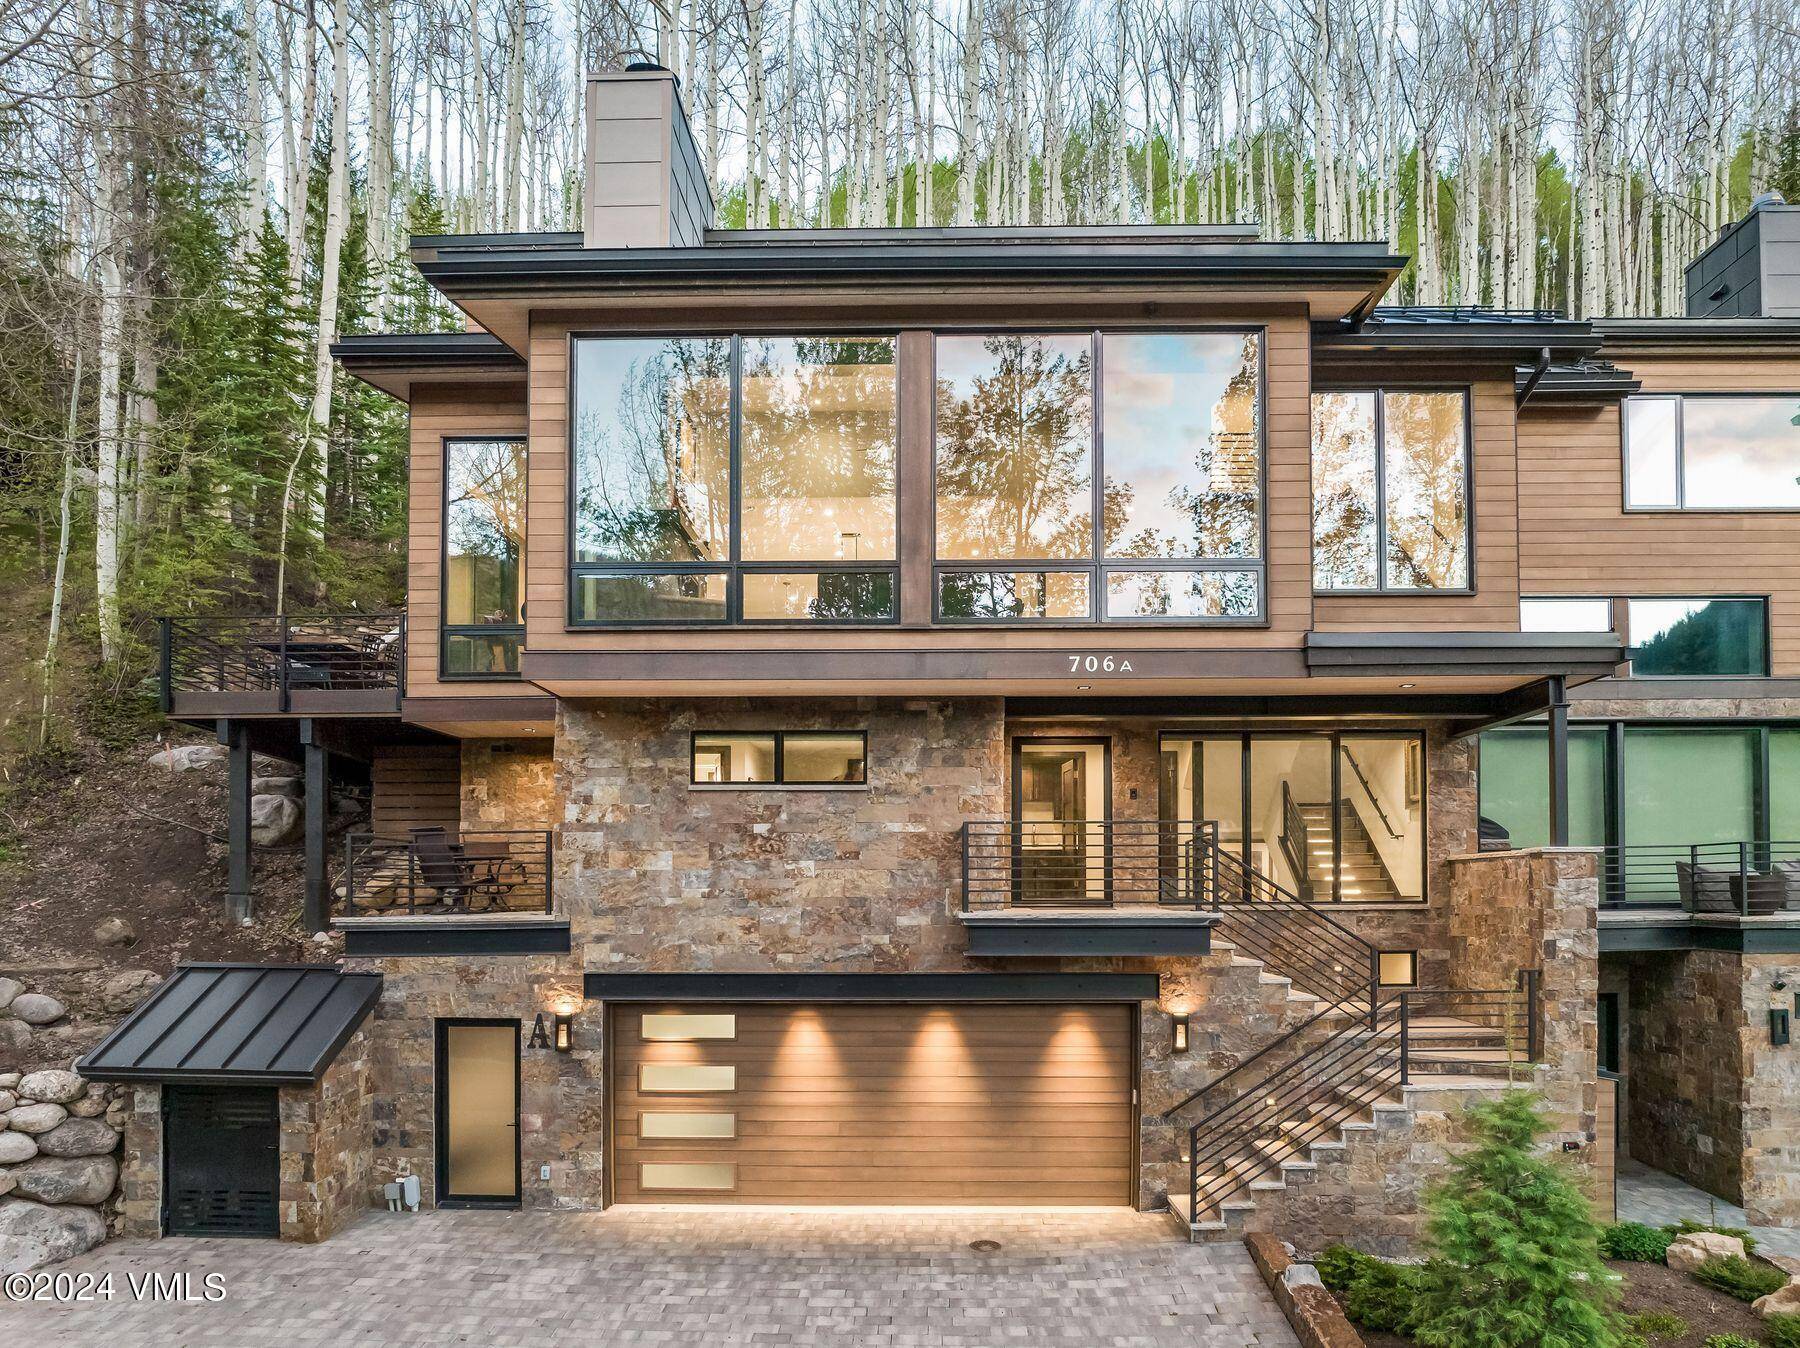 Completely rebuilt in 2021, this beautiful 5 bedroom 6 bathroom contemporary mountain home is ideally situated among the aspen groves on the mountainside of prestigious Forest Road, just below the ...